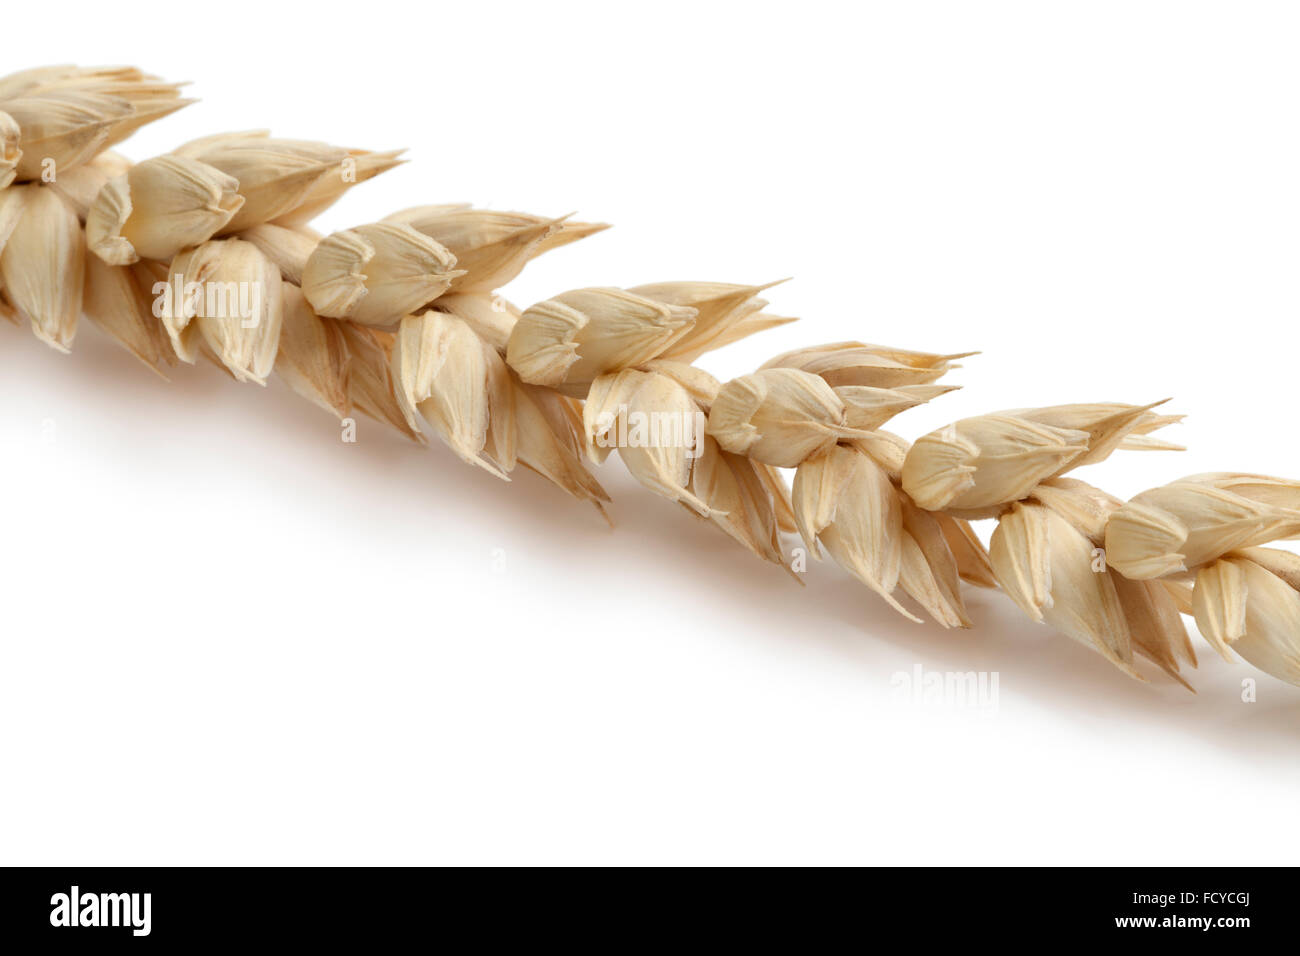 Ear of dried wheat close up on white background Stock Photo